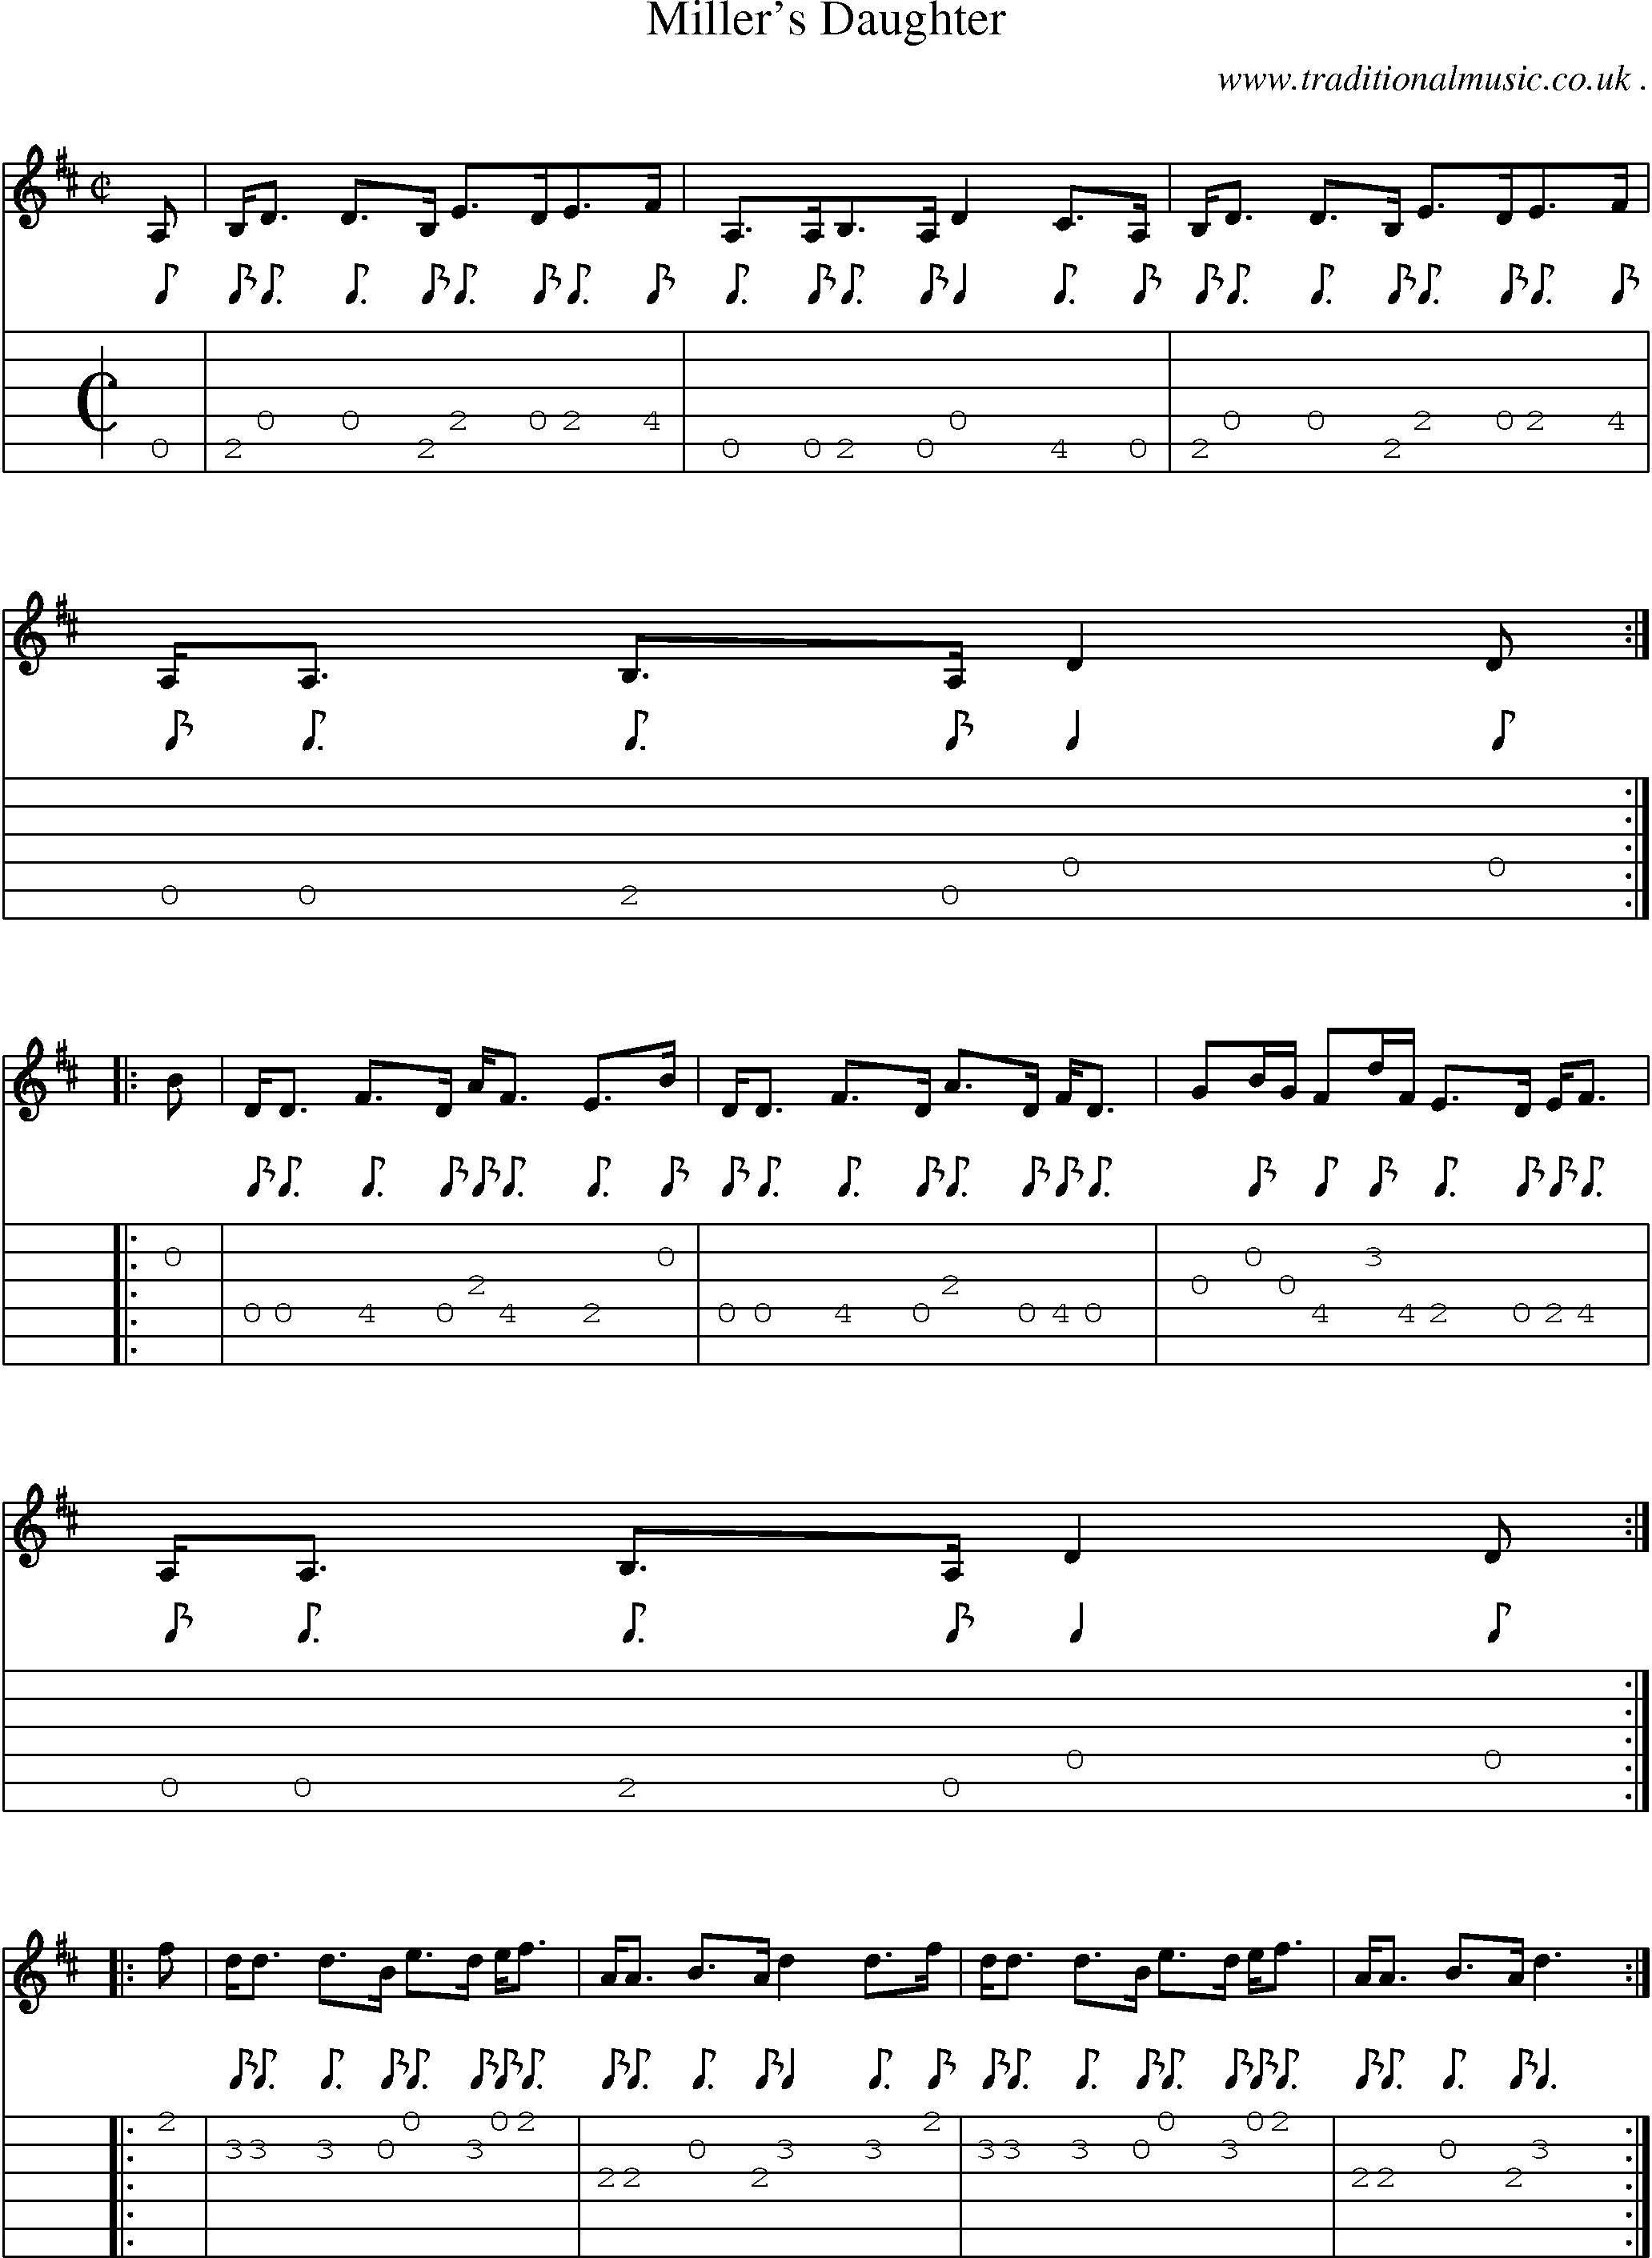 Sheet-music  score, Chords and Guitar Tabs for Millers Daughter